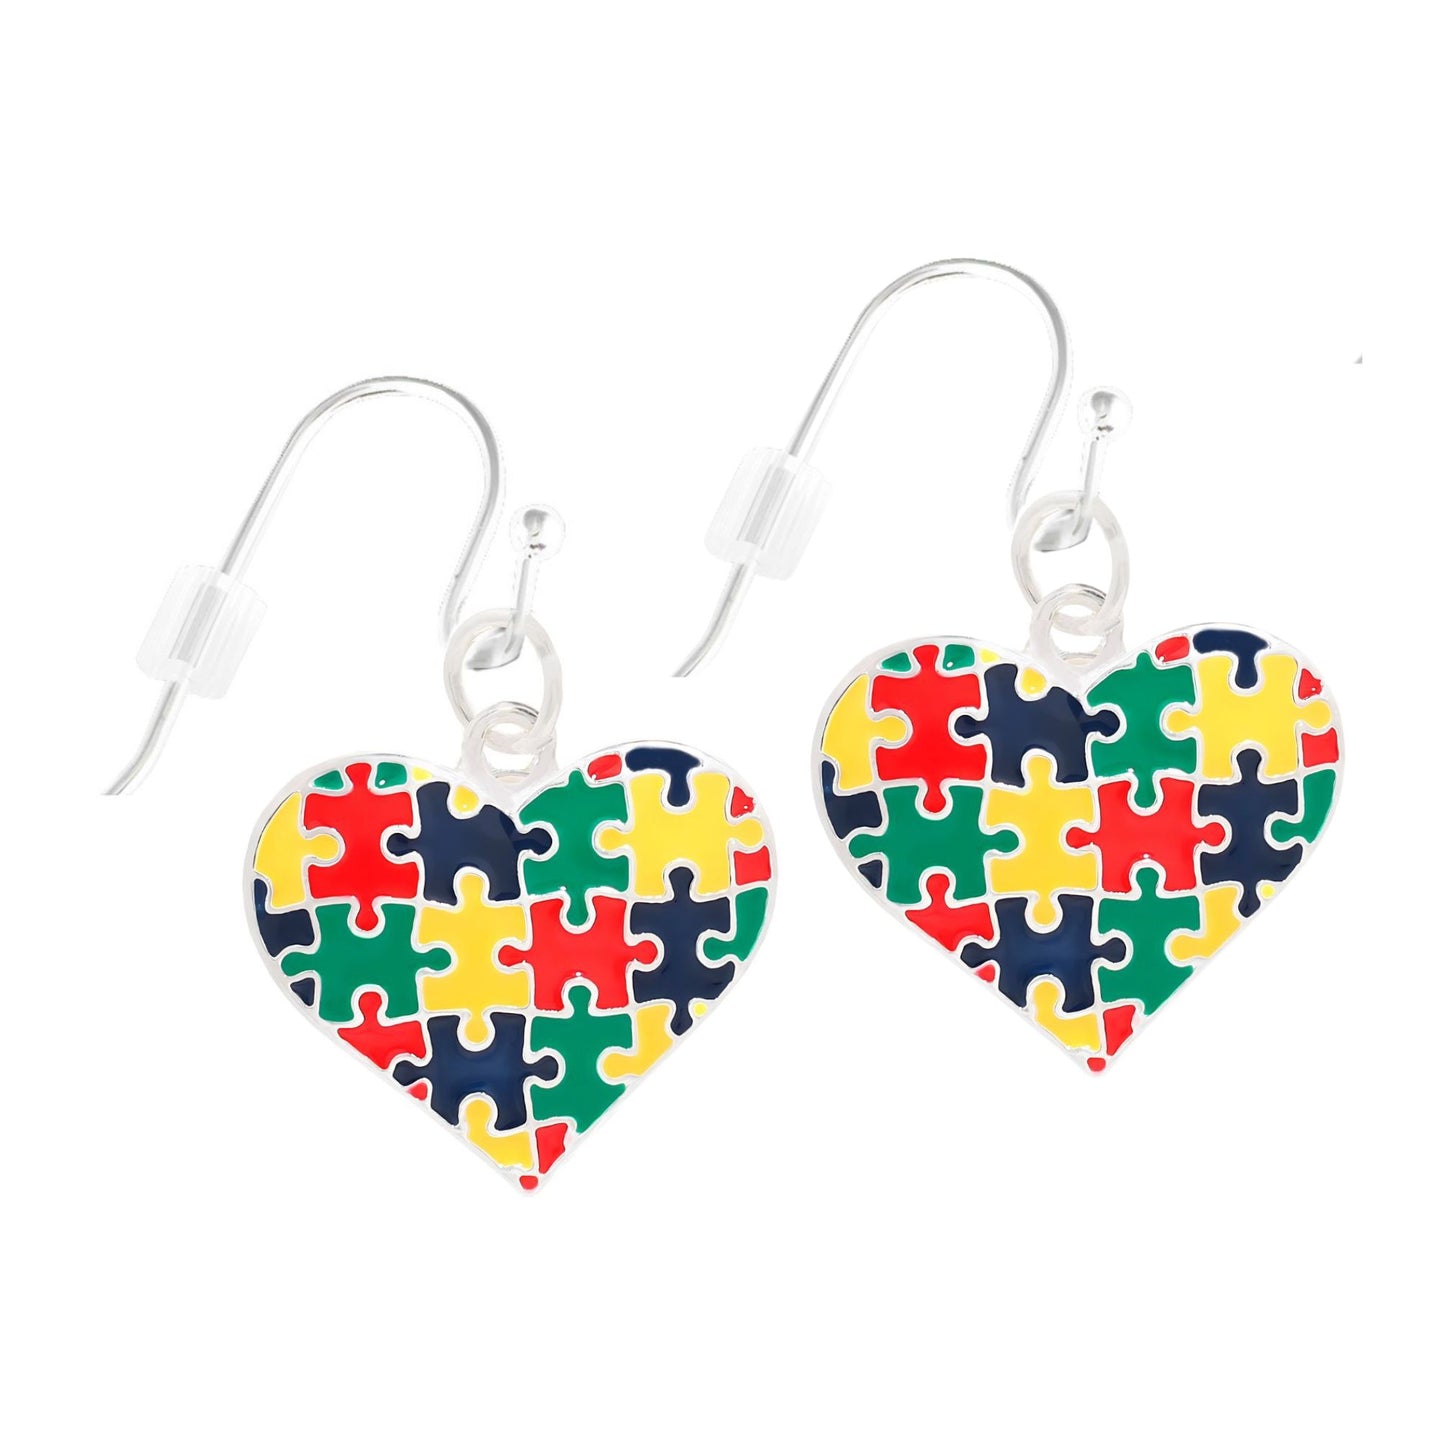 Hanging Autism Colored Puzzle Piece Heart Earrings